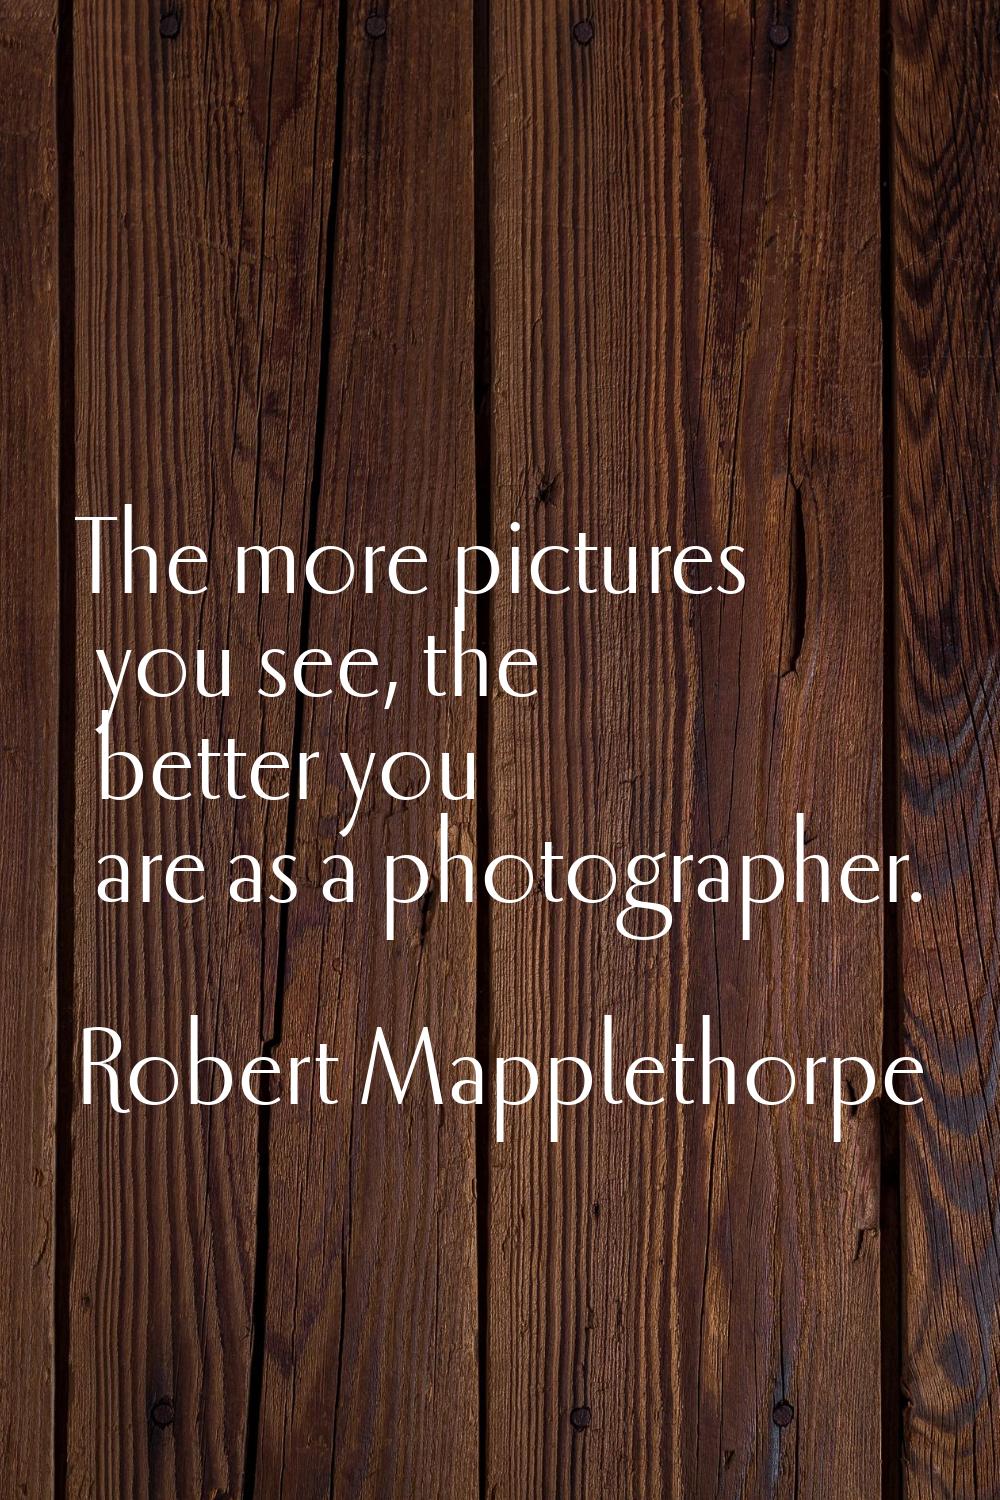 The more pictures you see, the better you are as a photographer.